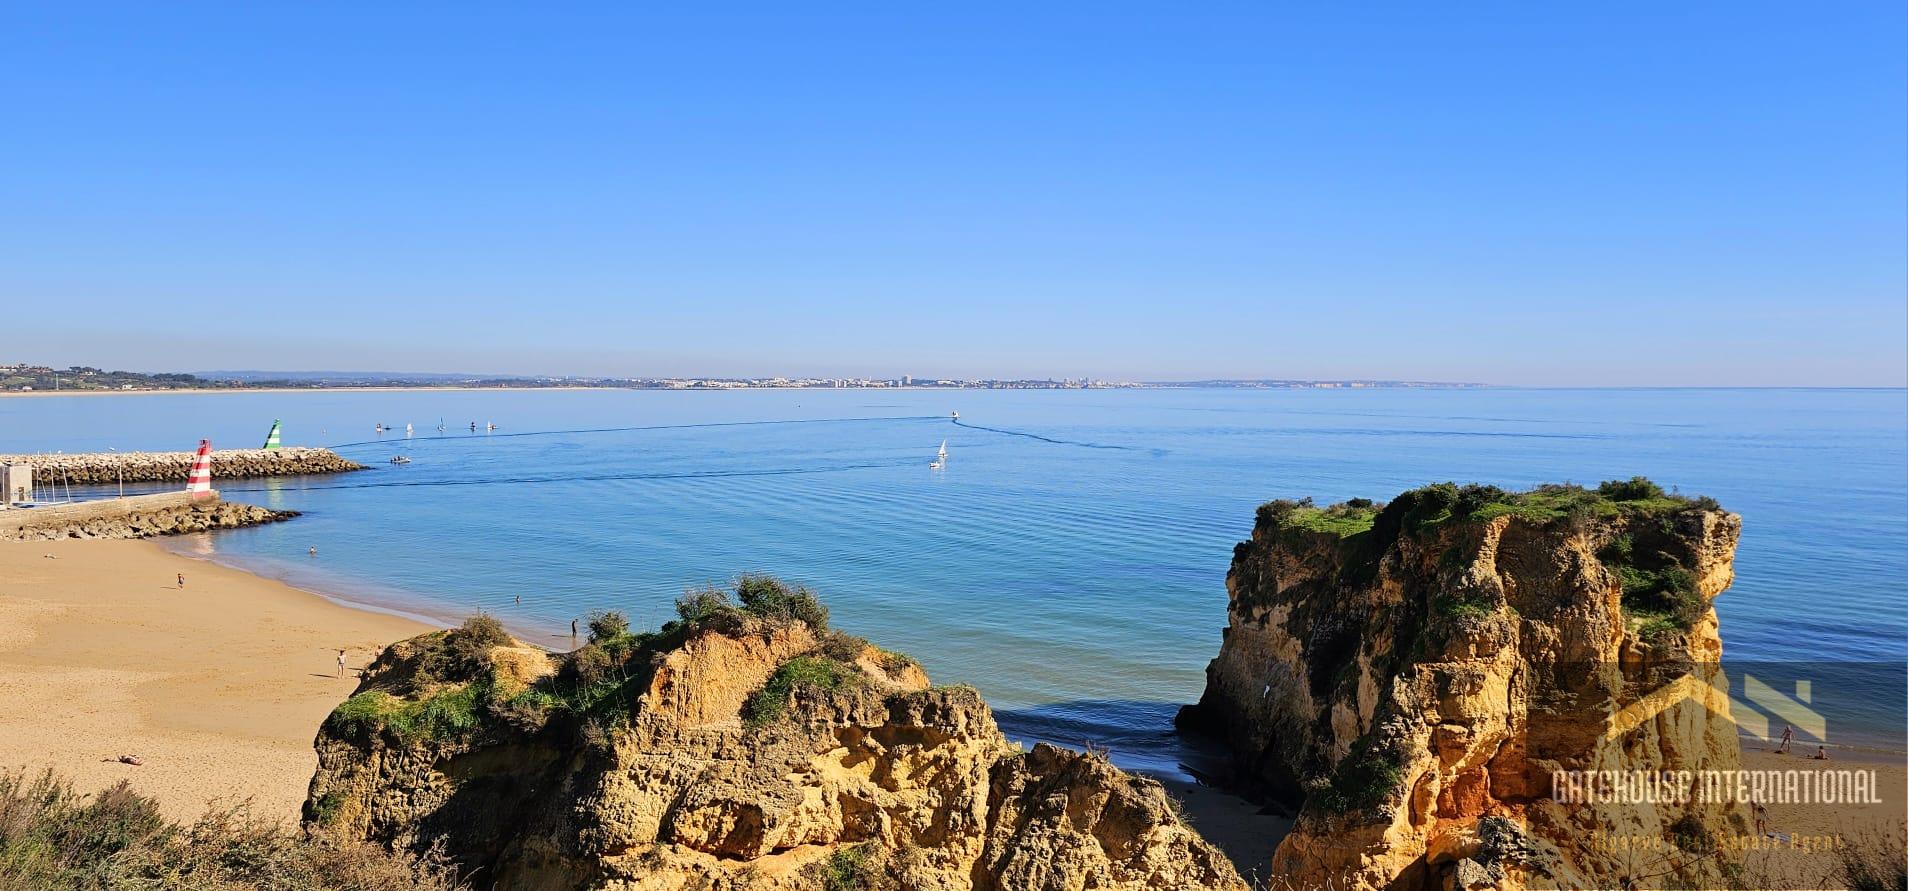 The Property Market of Lagos in the Algarve